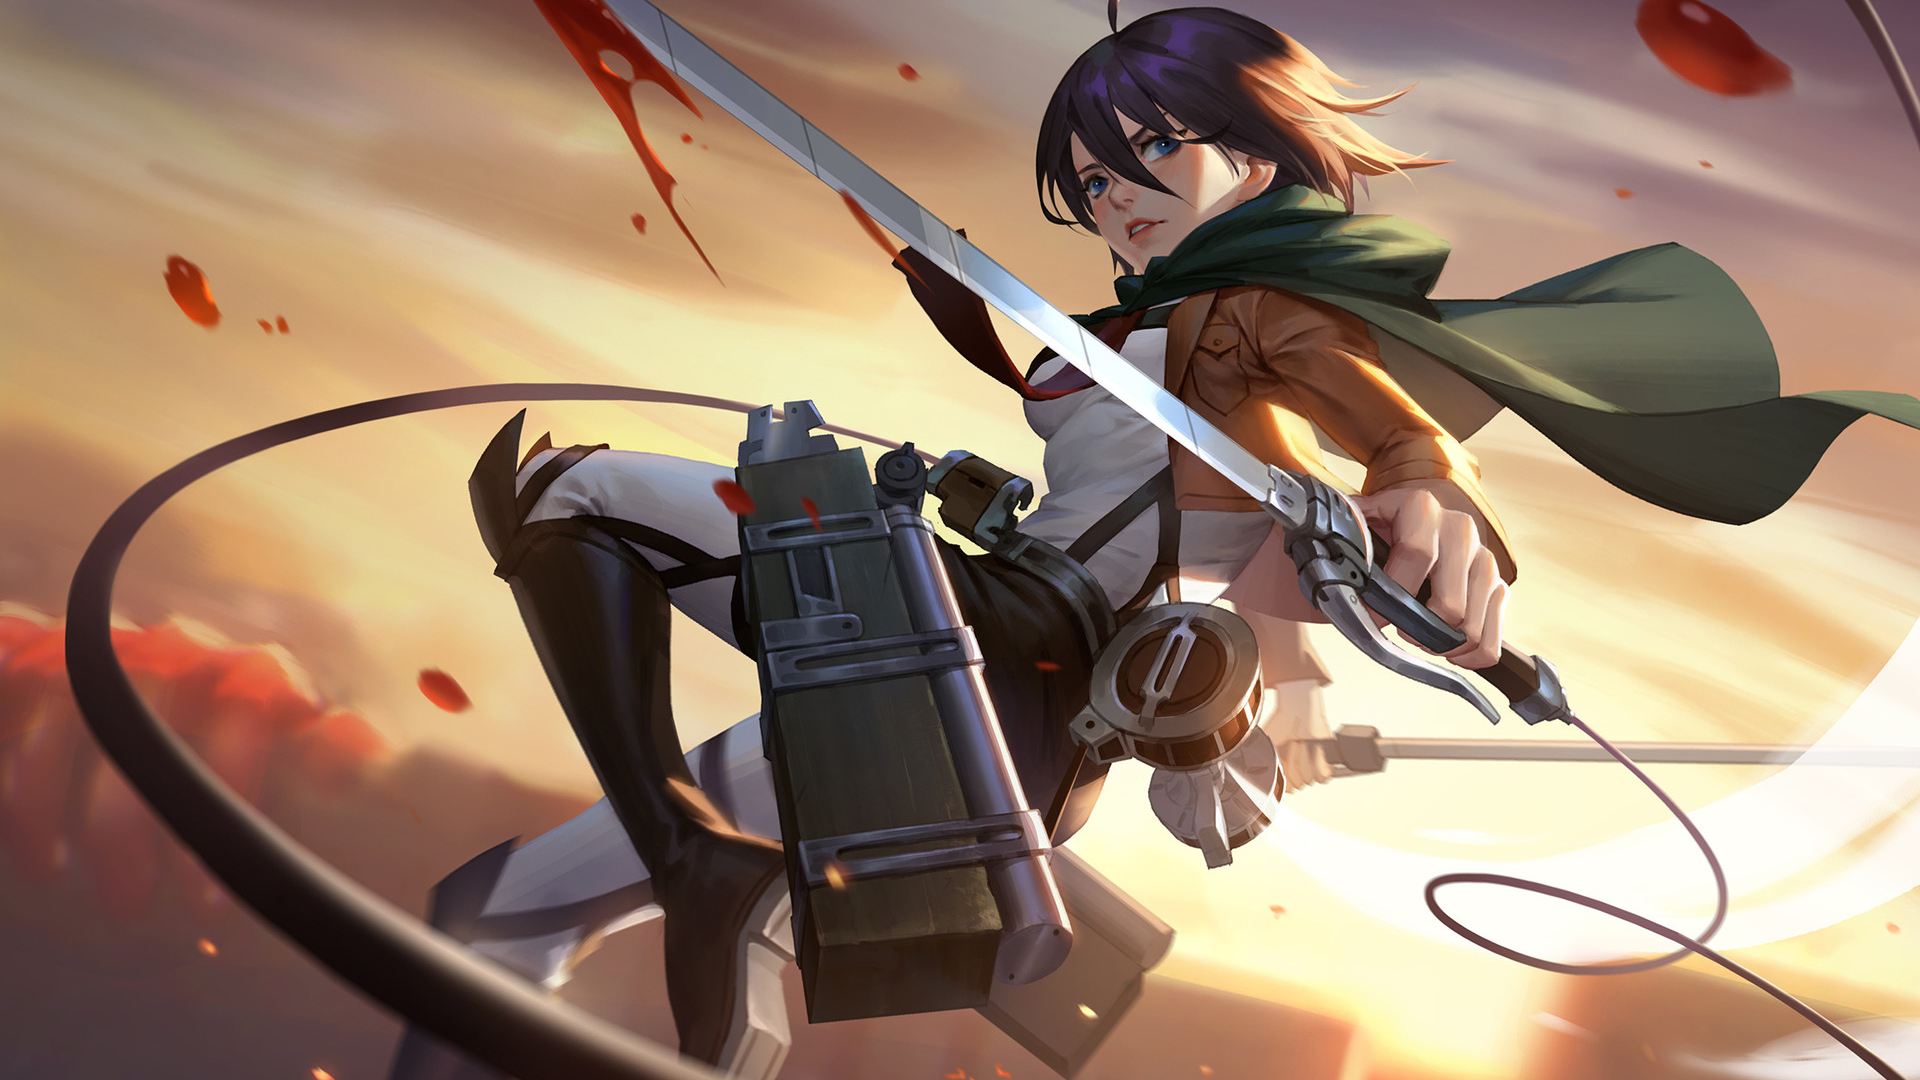 3. "Mikasa Ackerman" from the anime "Attack on Titan" - wide 8